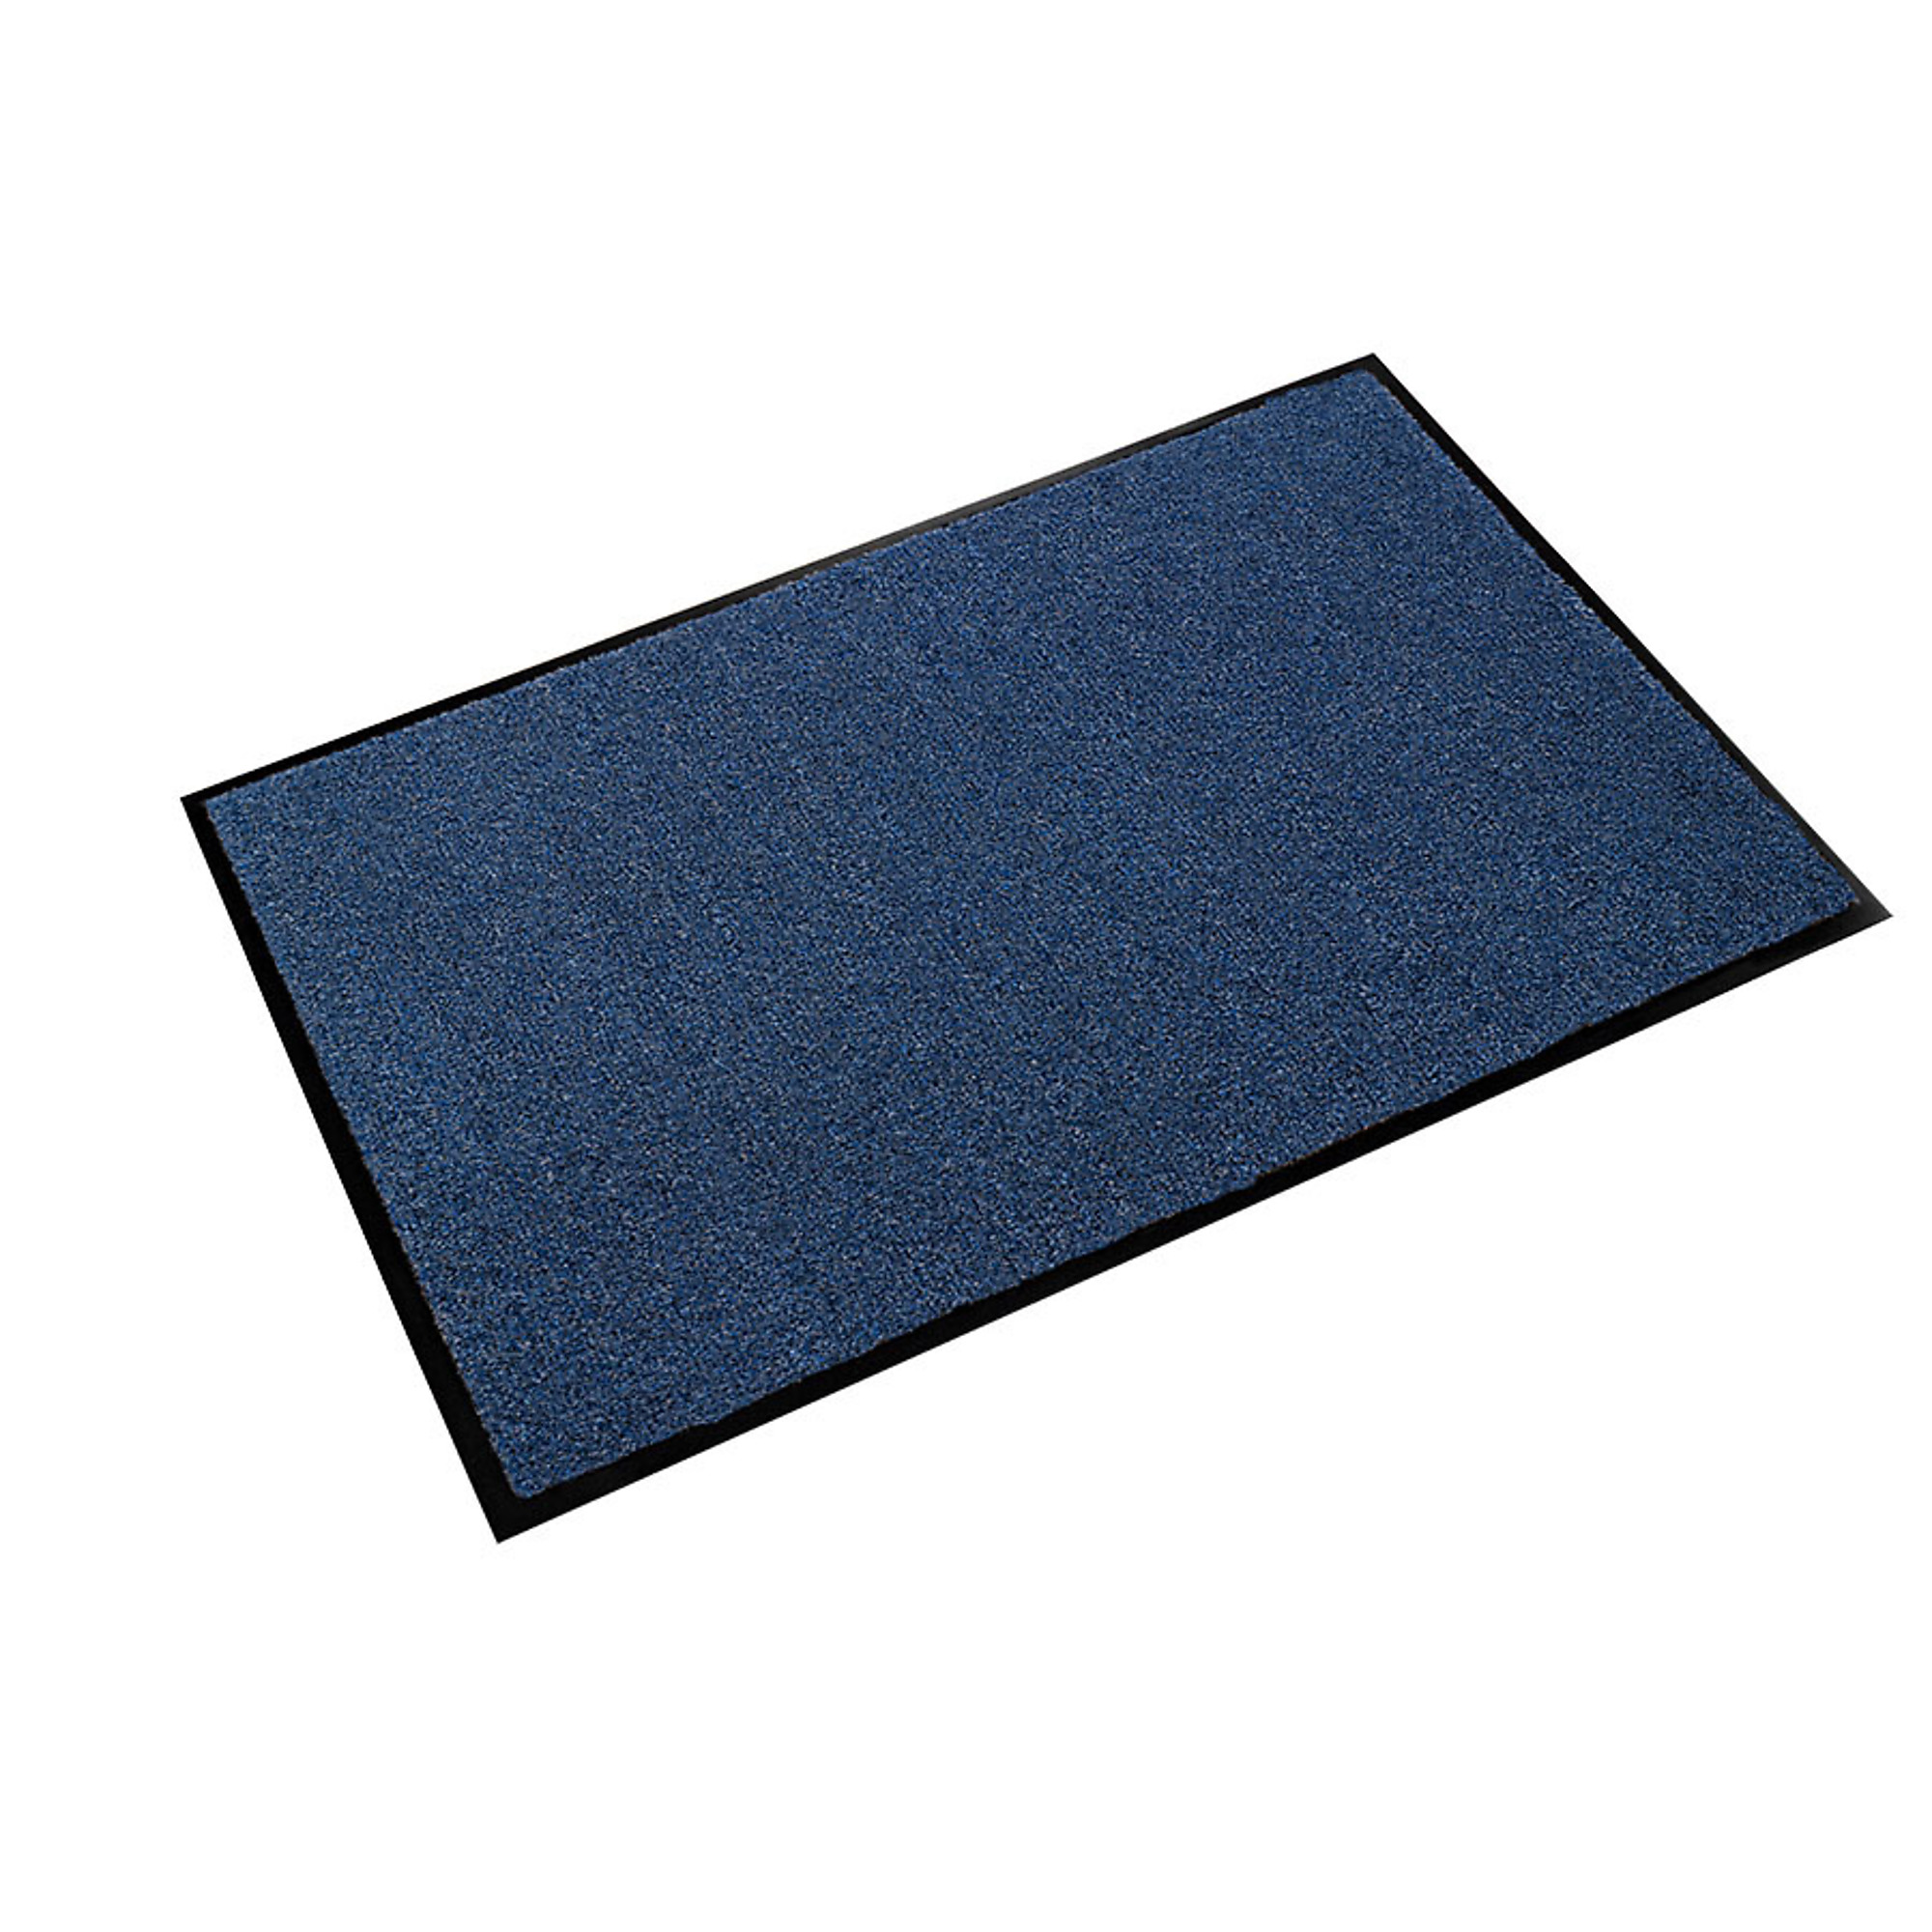 Crown Matting Technologies, Rely-On Olefin 3ft.x60ft. Marlin Blue, Width 36 in, Length 720 in, Thickness 3/8 in, Model GSR0036MB